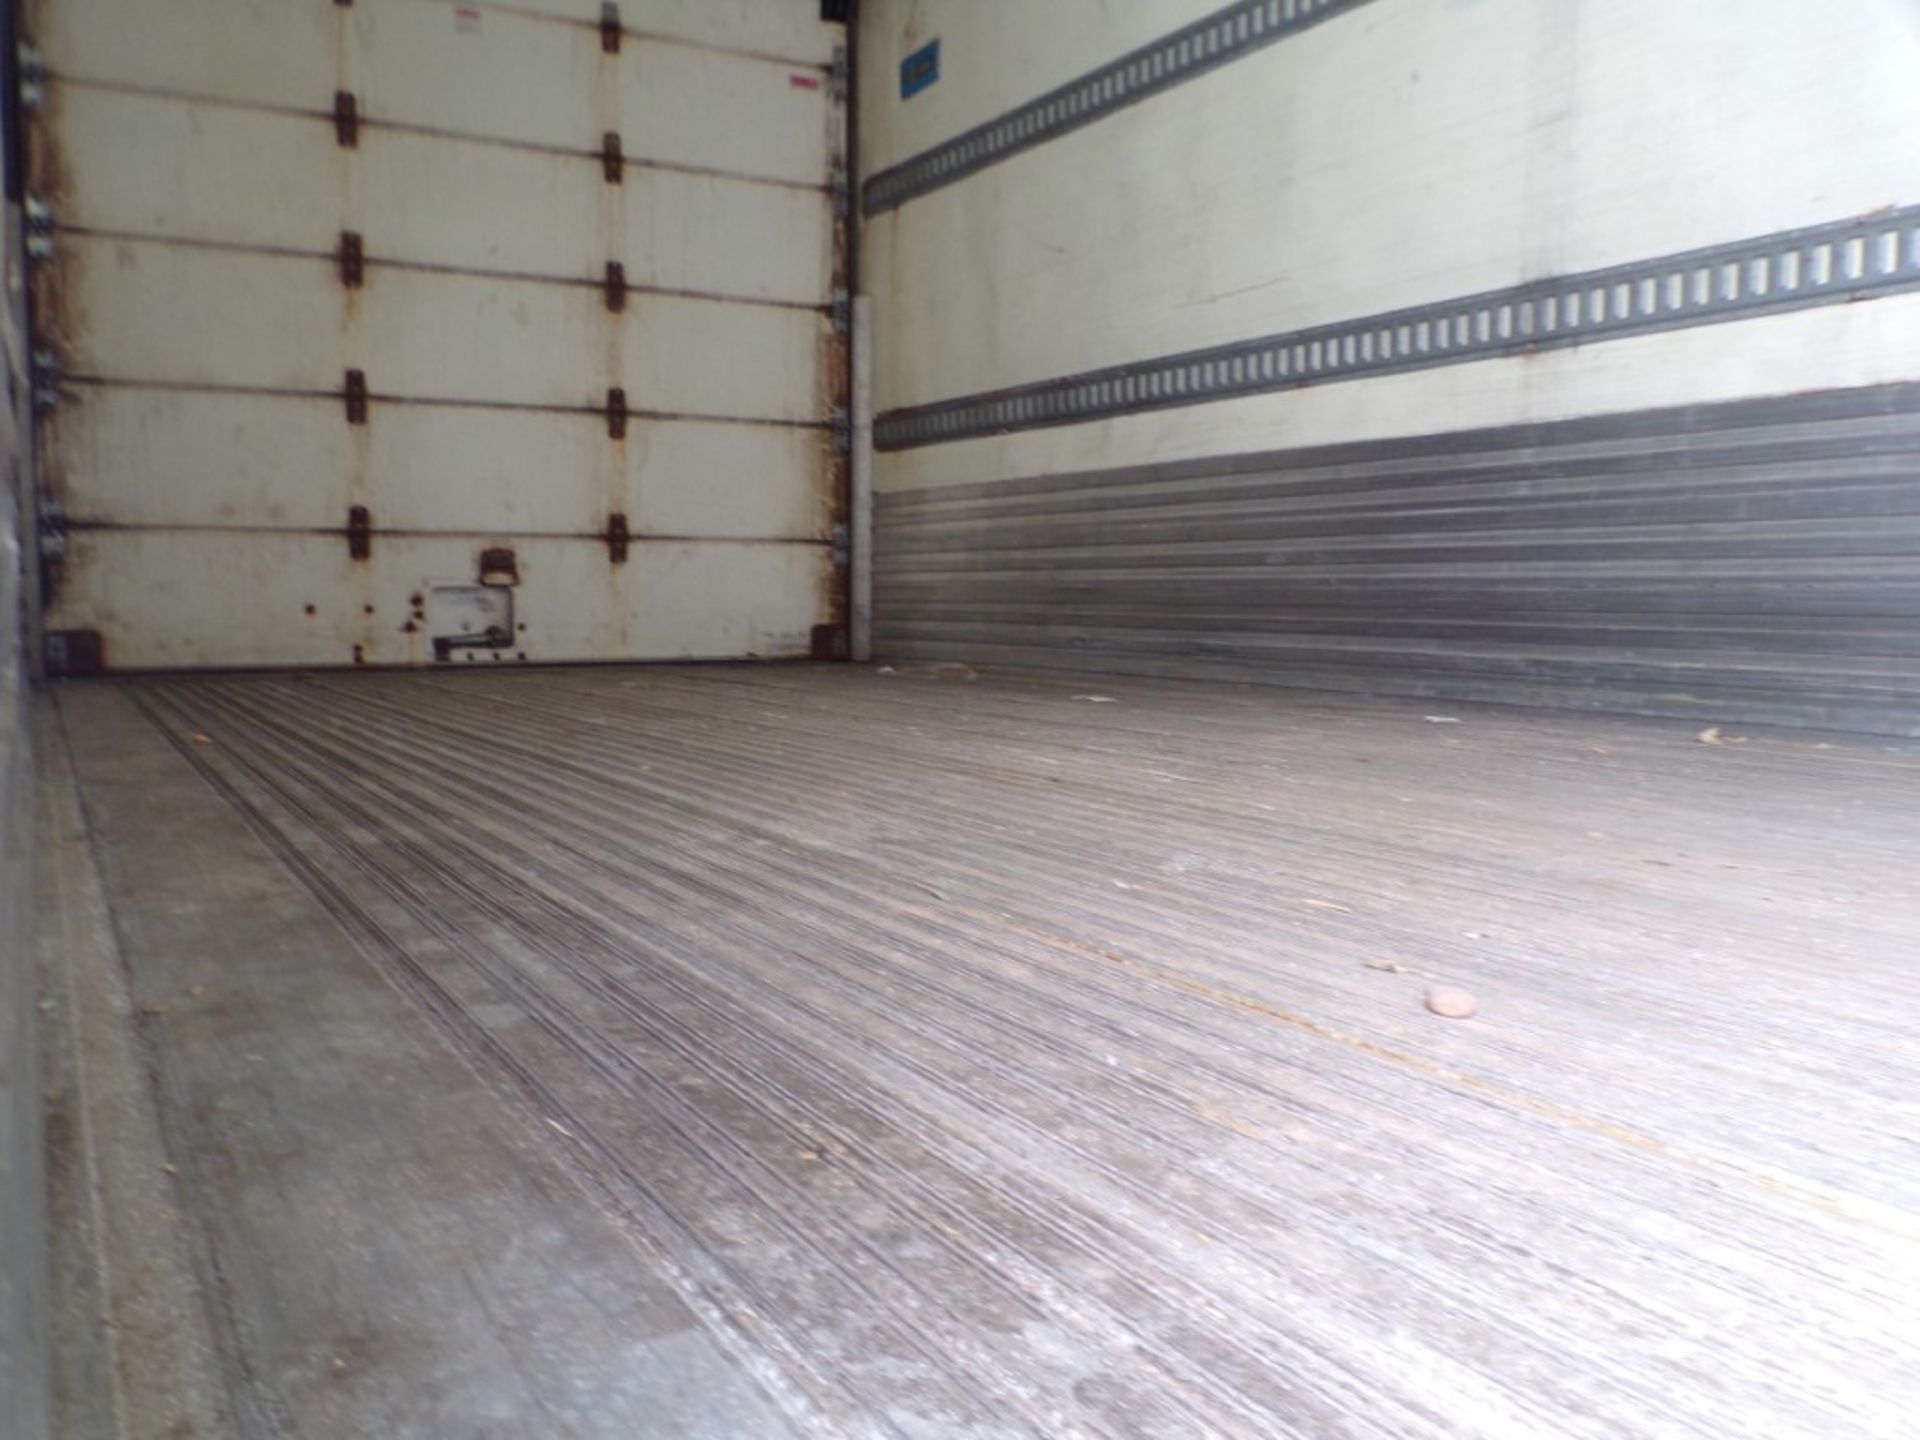 2012 Utility Trailer, Thermal King Reefer Unit, 65000 GVW, Lift Gate, Roll-Up Door, - Image 8 of 10